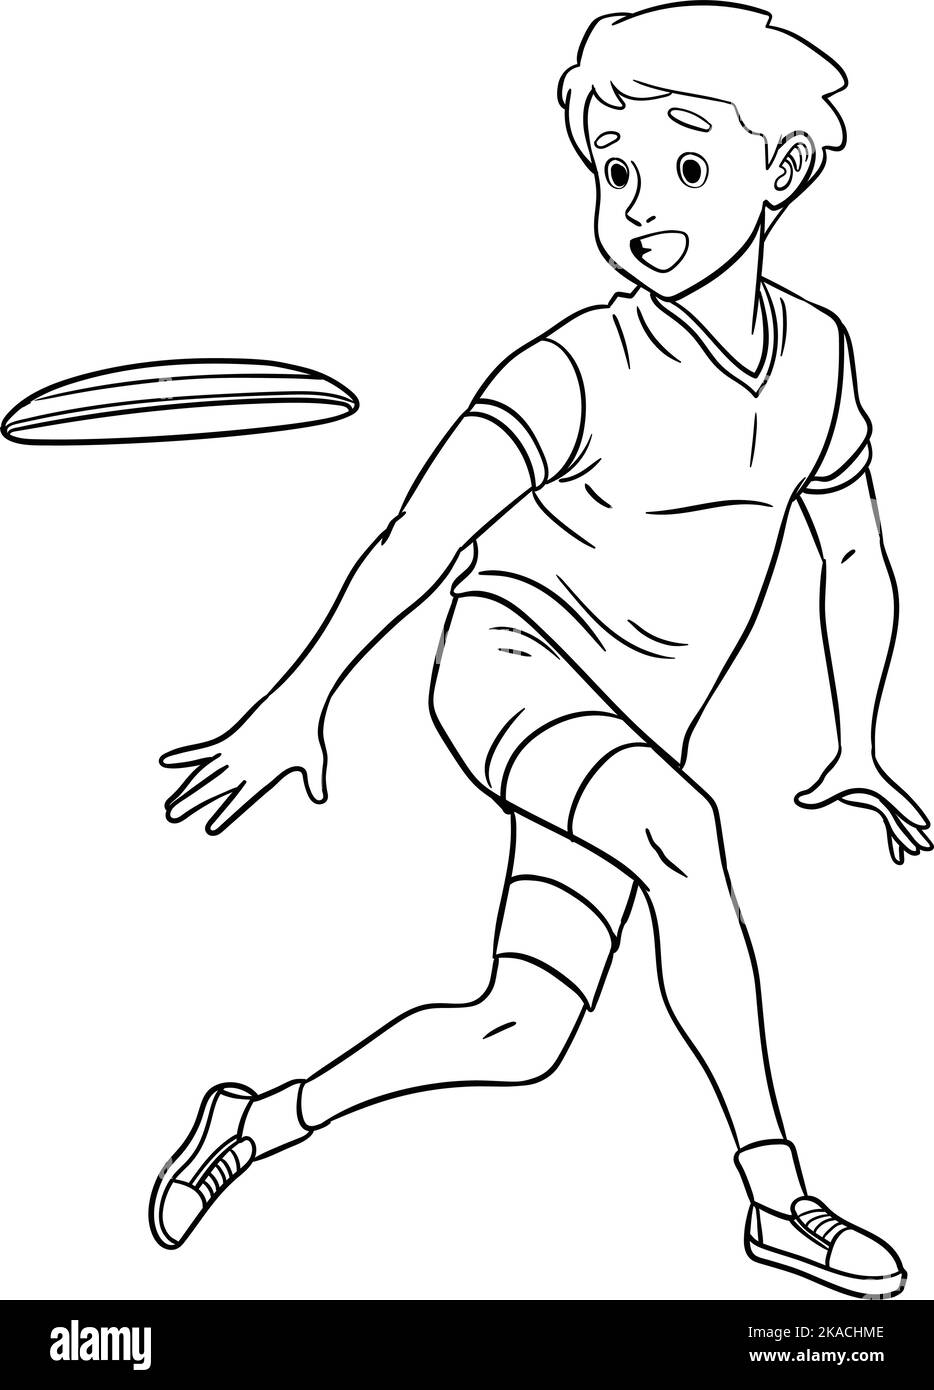 Frisbee Isolated Coloring Page for Kids Stock Vector